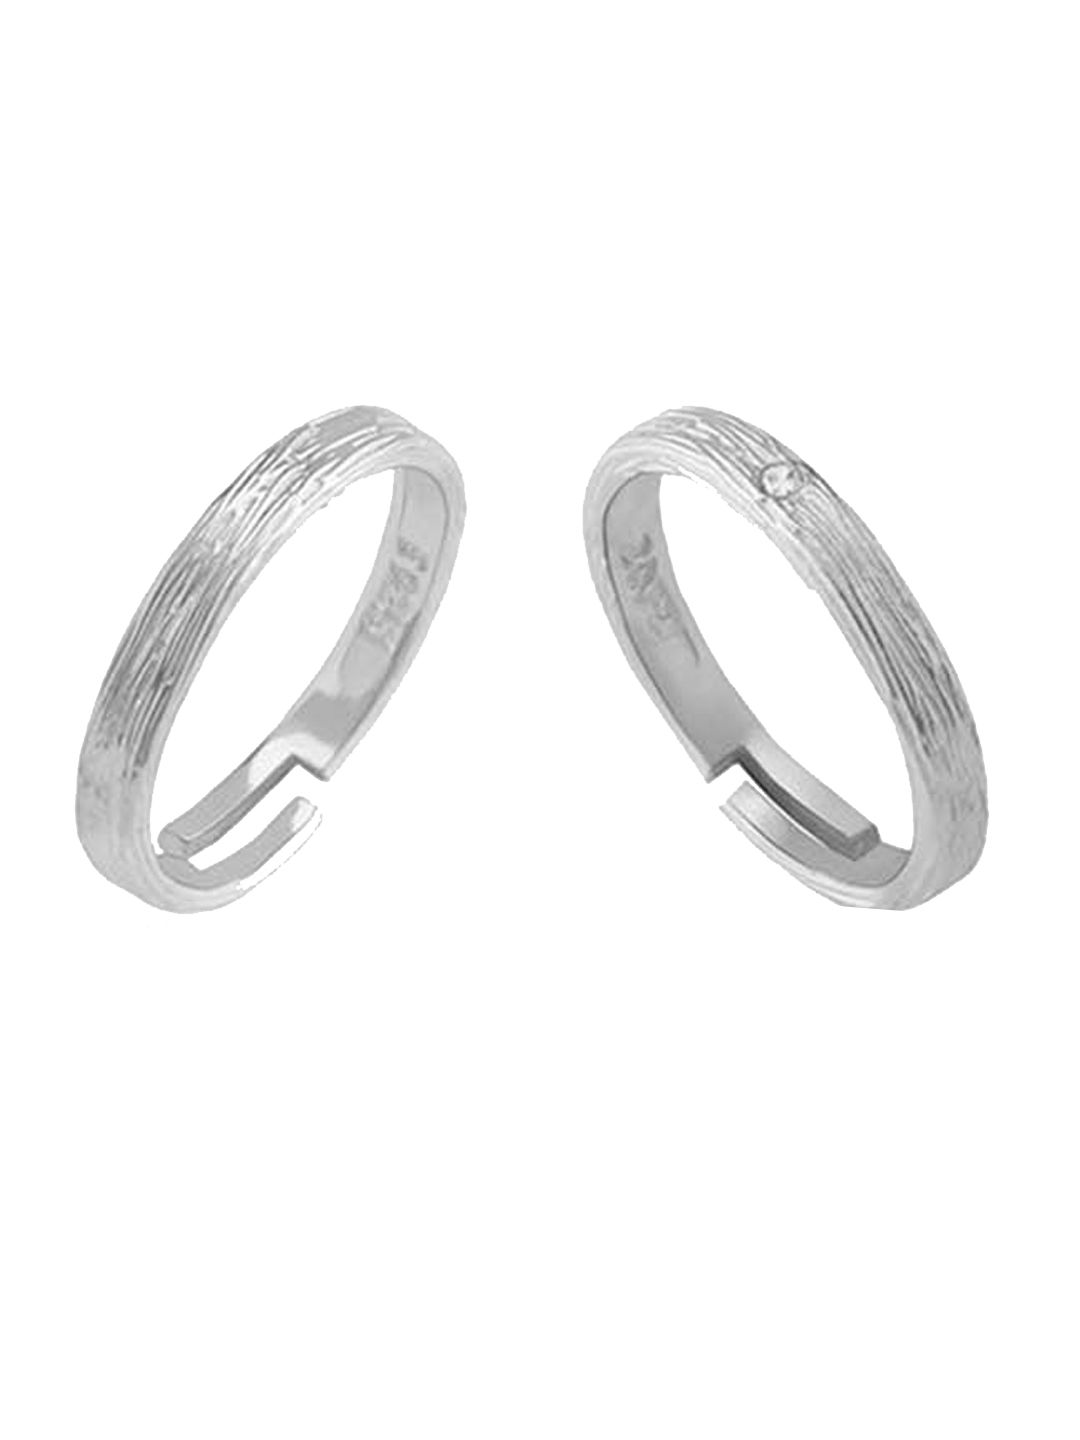 GIVA 925 Sterling Silver Rhodium-Plated Heart Song Couple Rings Price in India